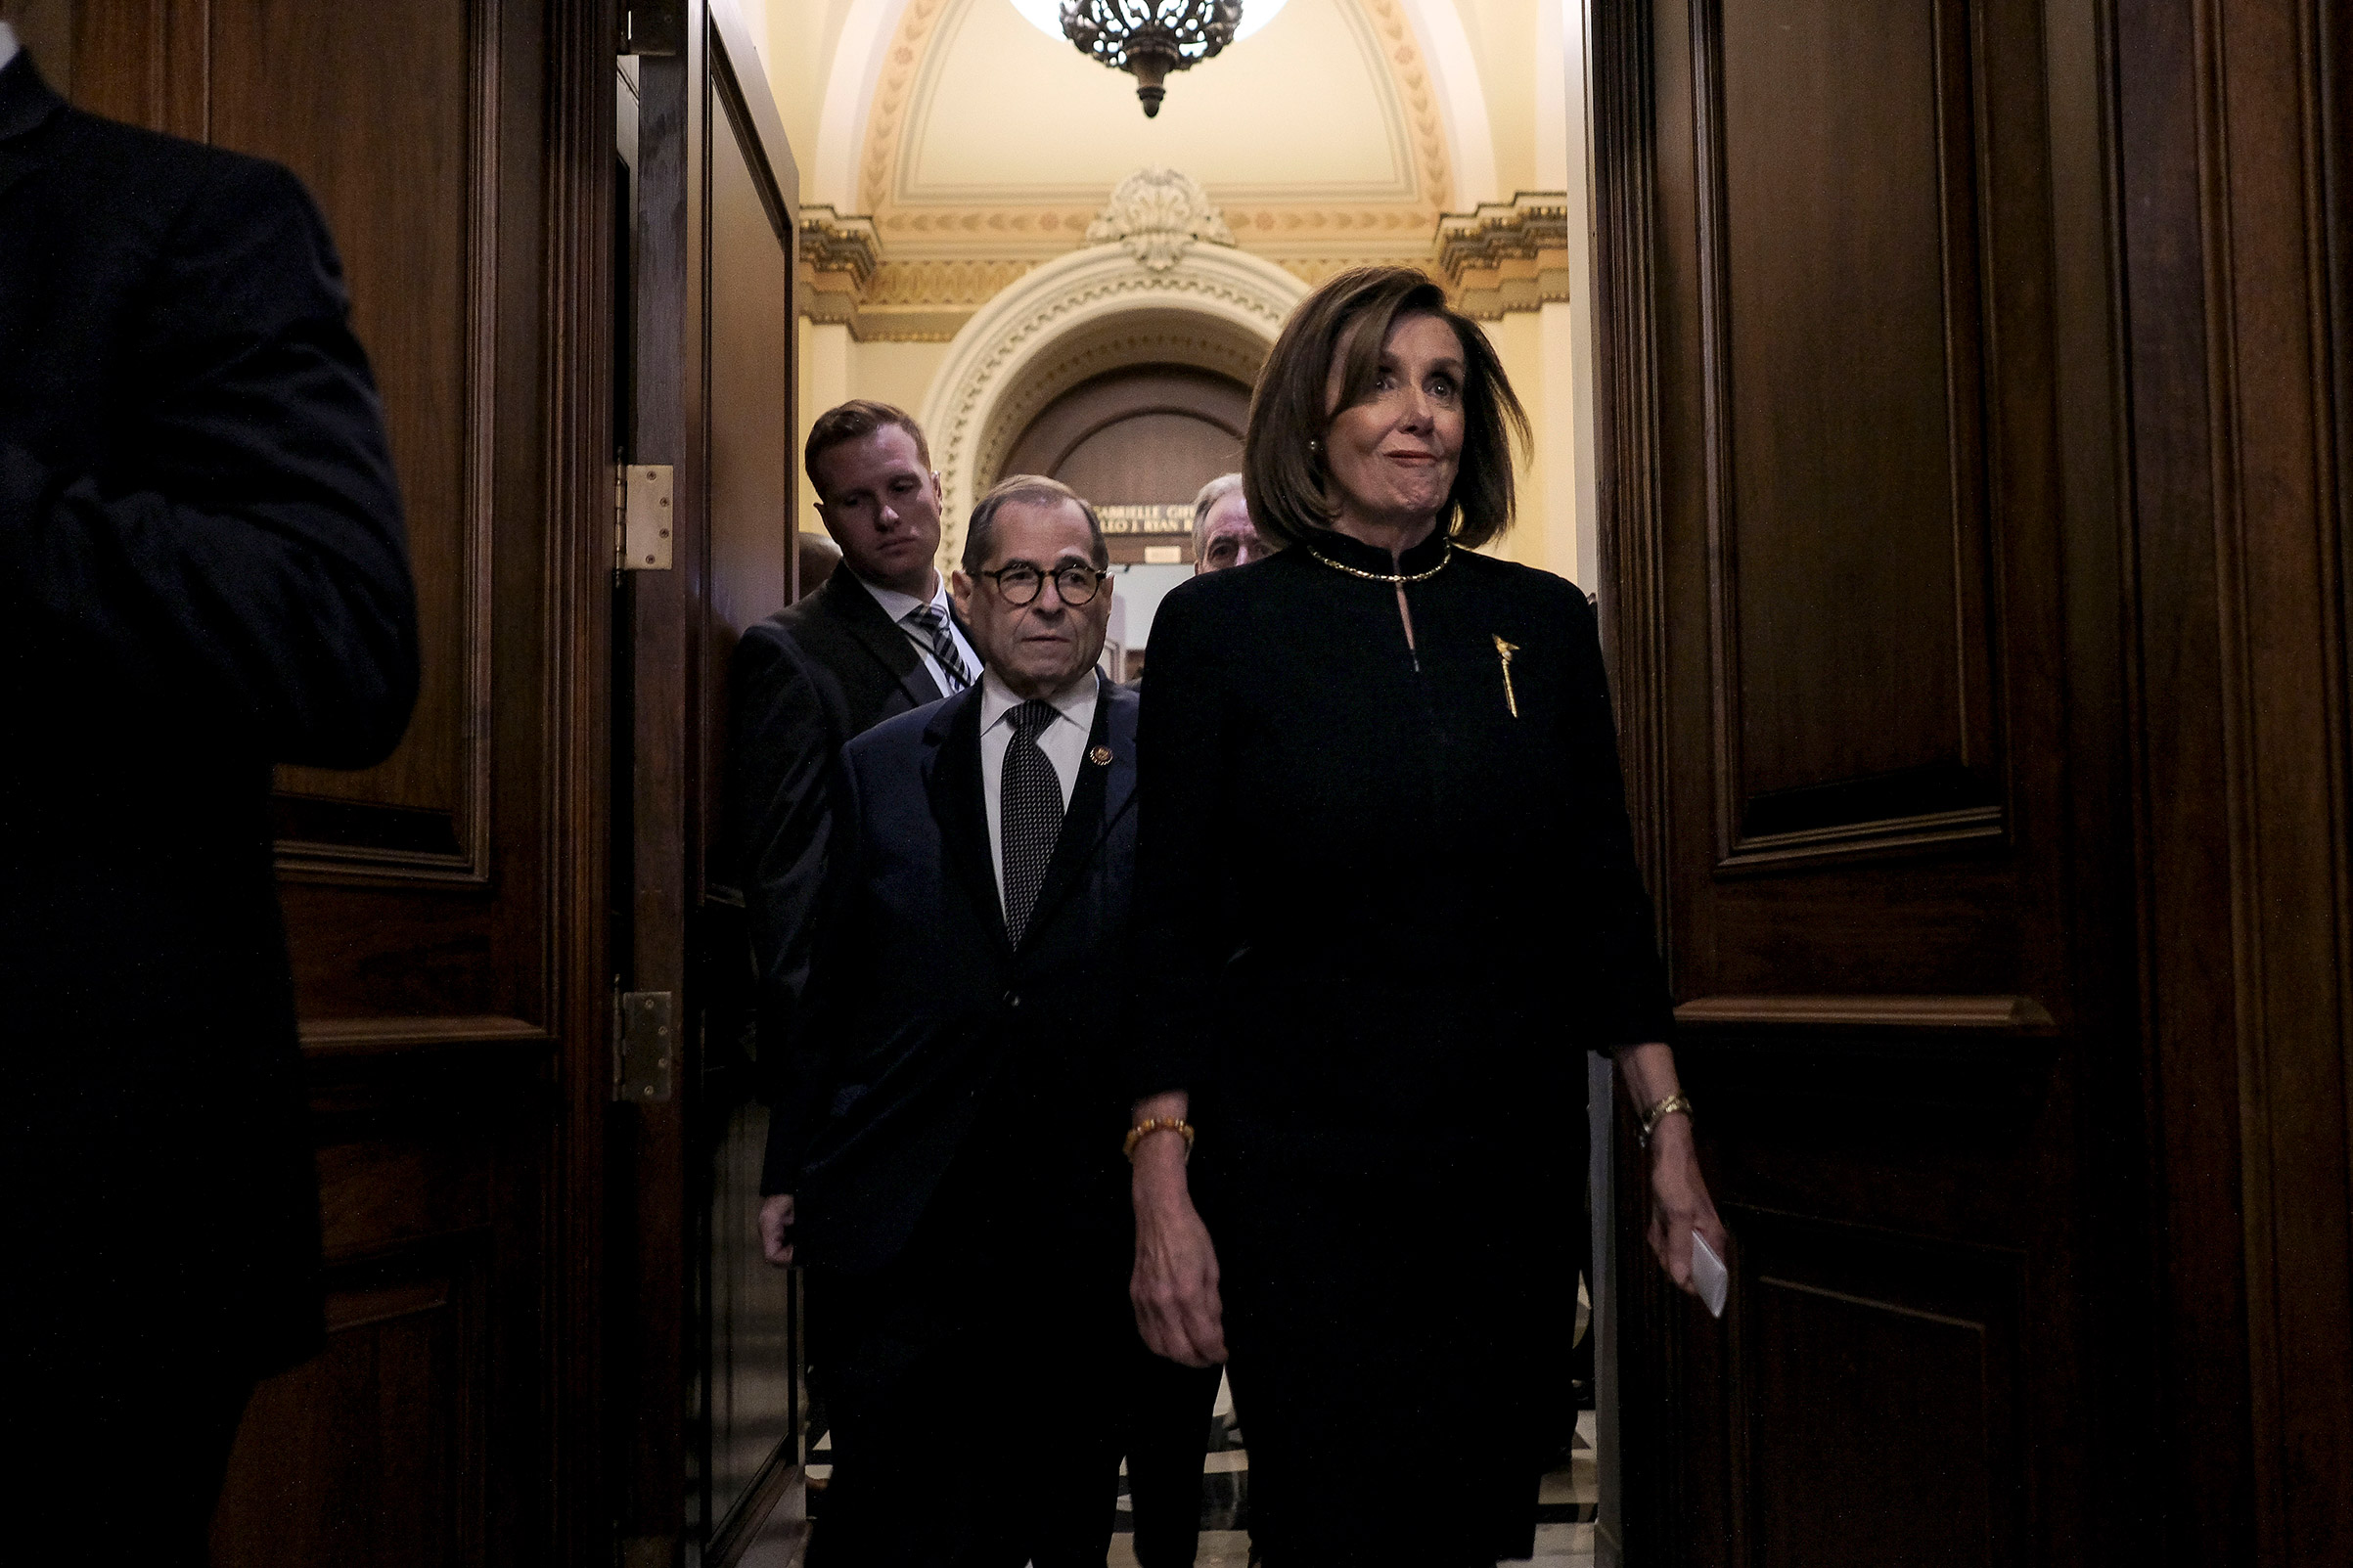 Speaker Nancy Pelosi (D-Calif.) and Judiciary Chairman Jerry Nadler (D-N.Y.) walk off the floor after the House vote on articles of impeachment at the Capitol in Washington, D.C. on Dec. 18, 2019. (Gabriella Demczuk for TIME)